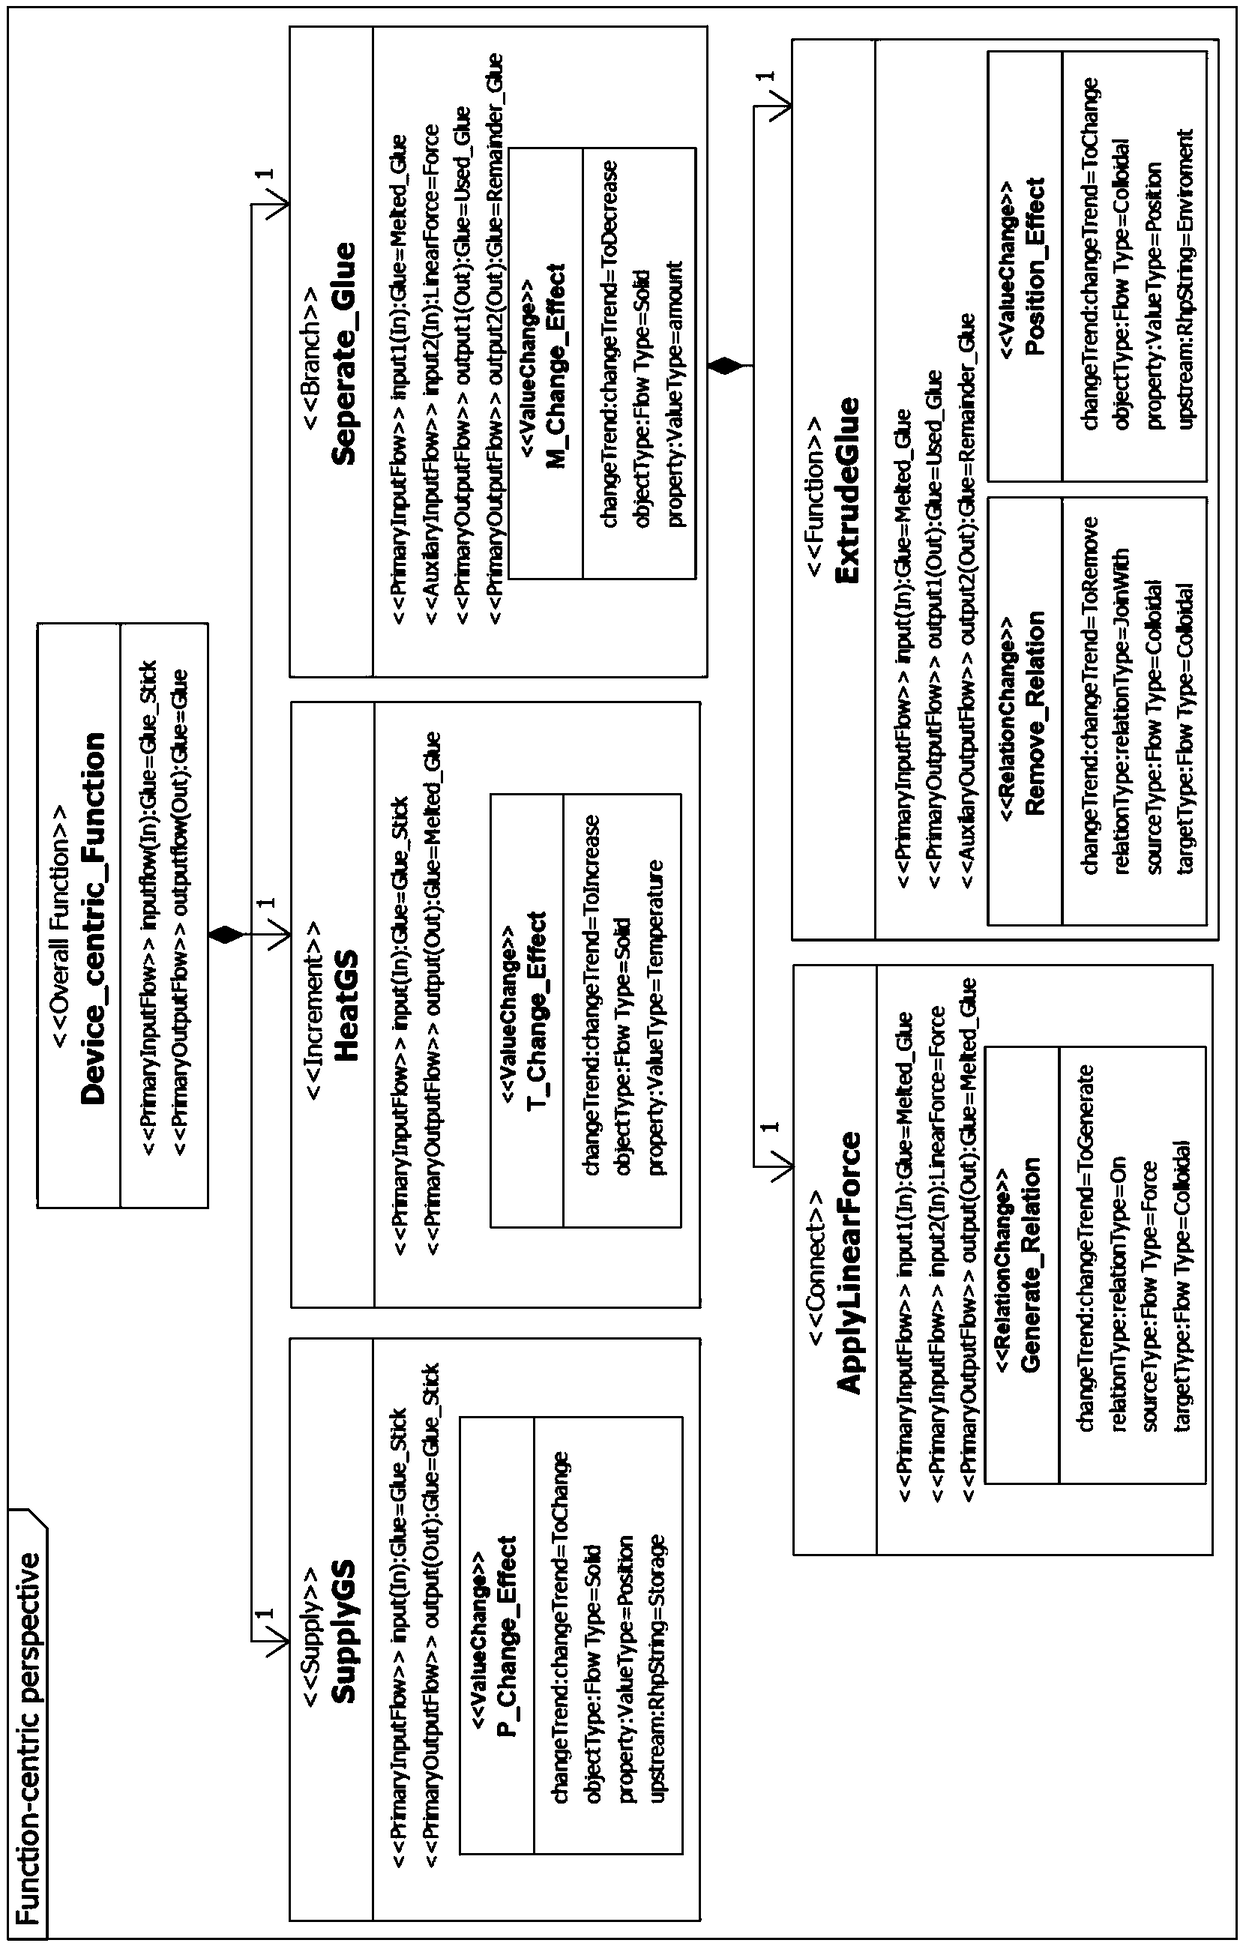 An ontology-based product function semantic modeling representation and application